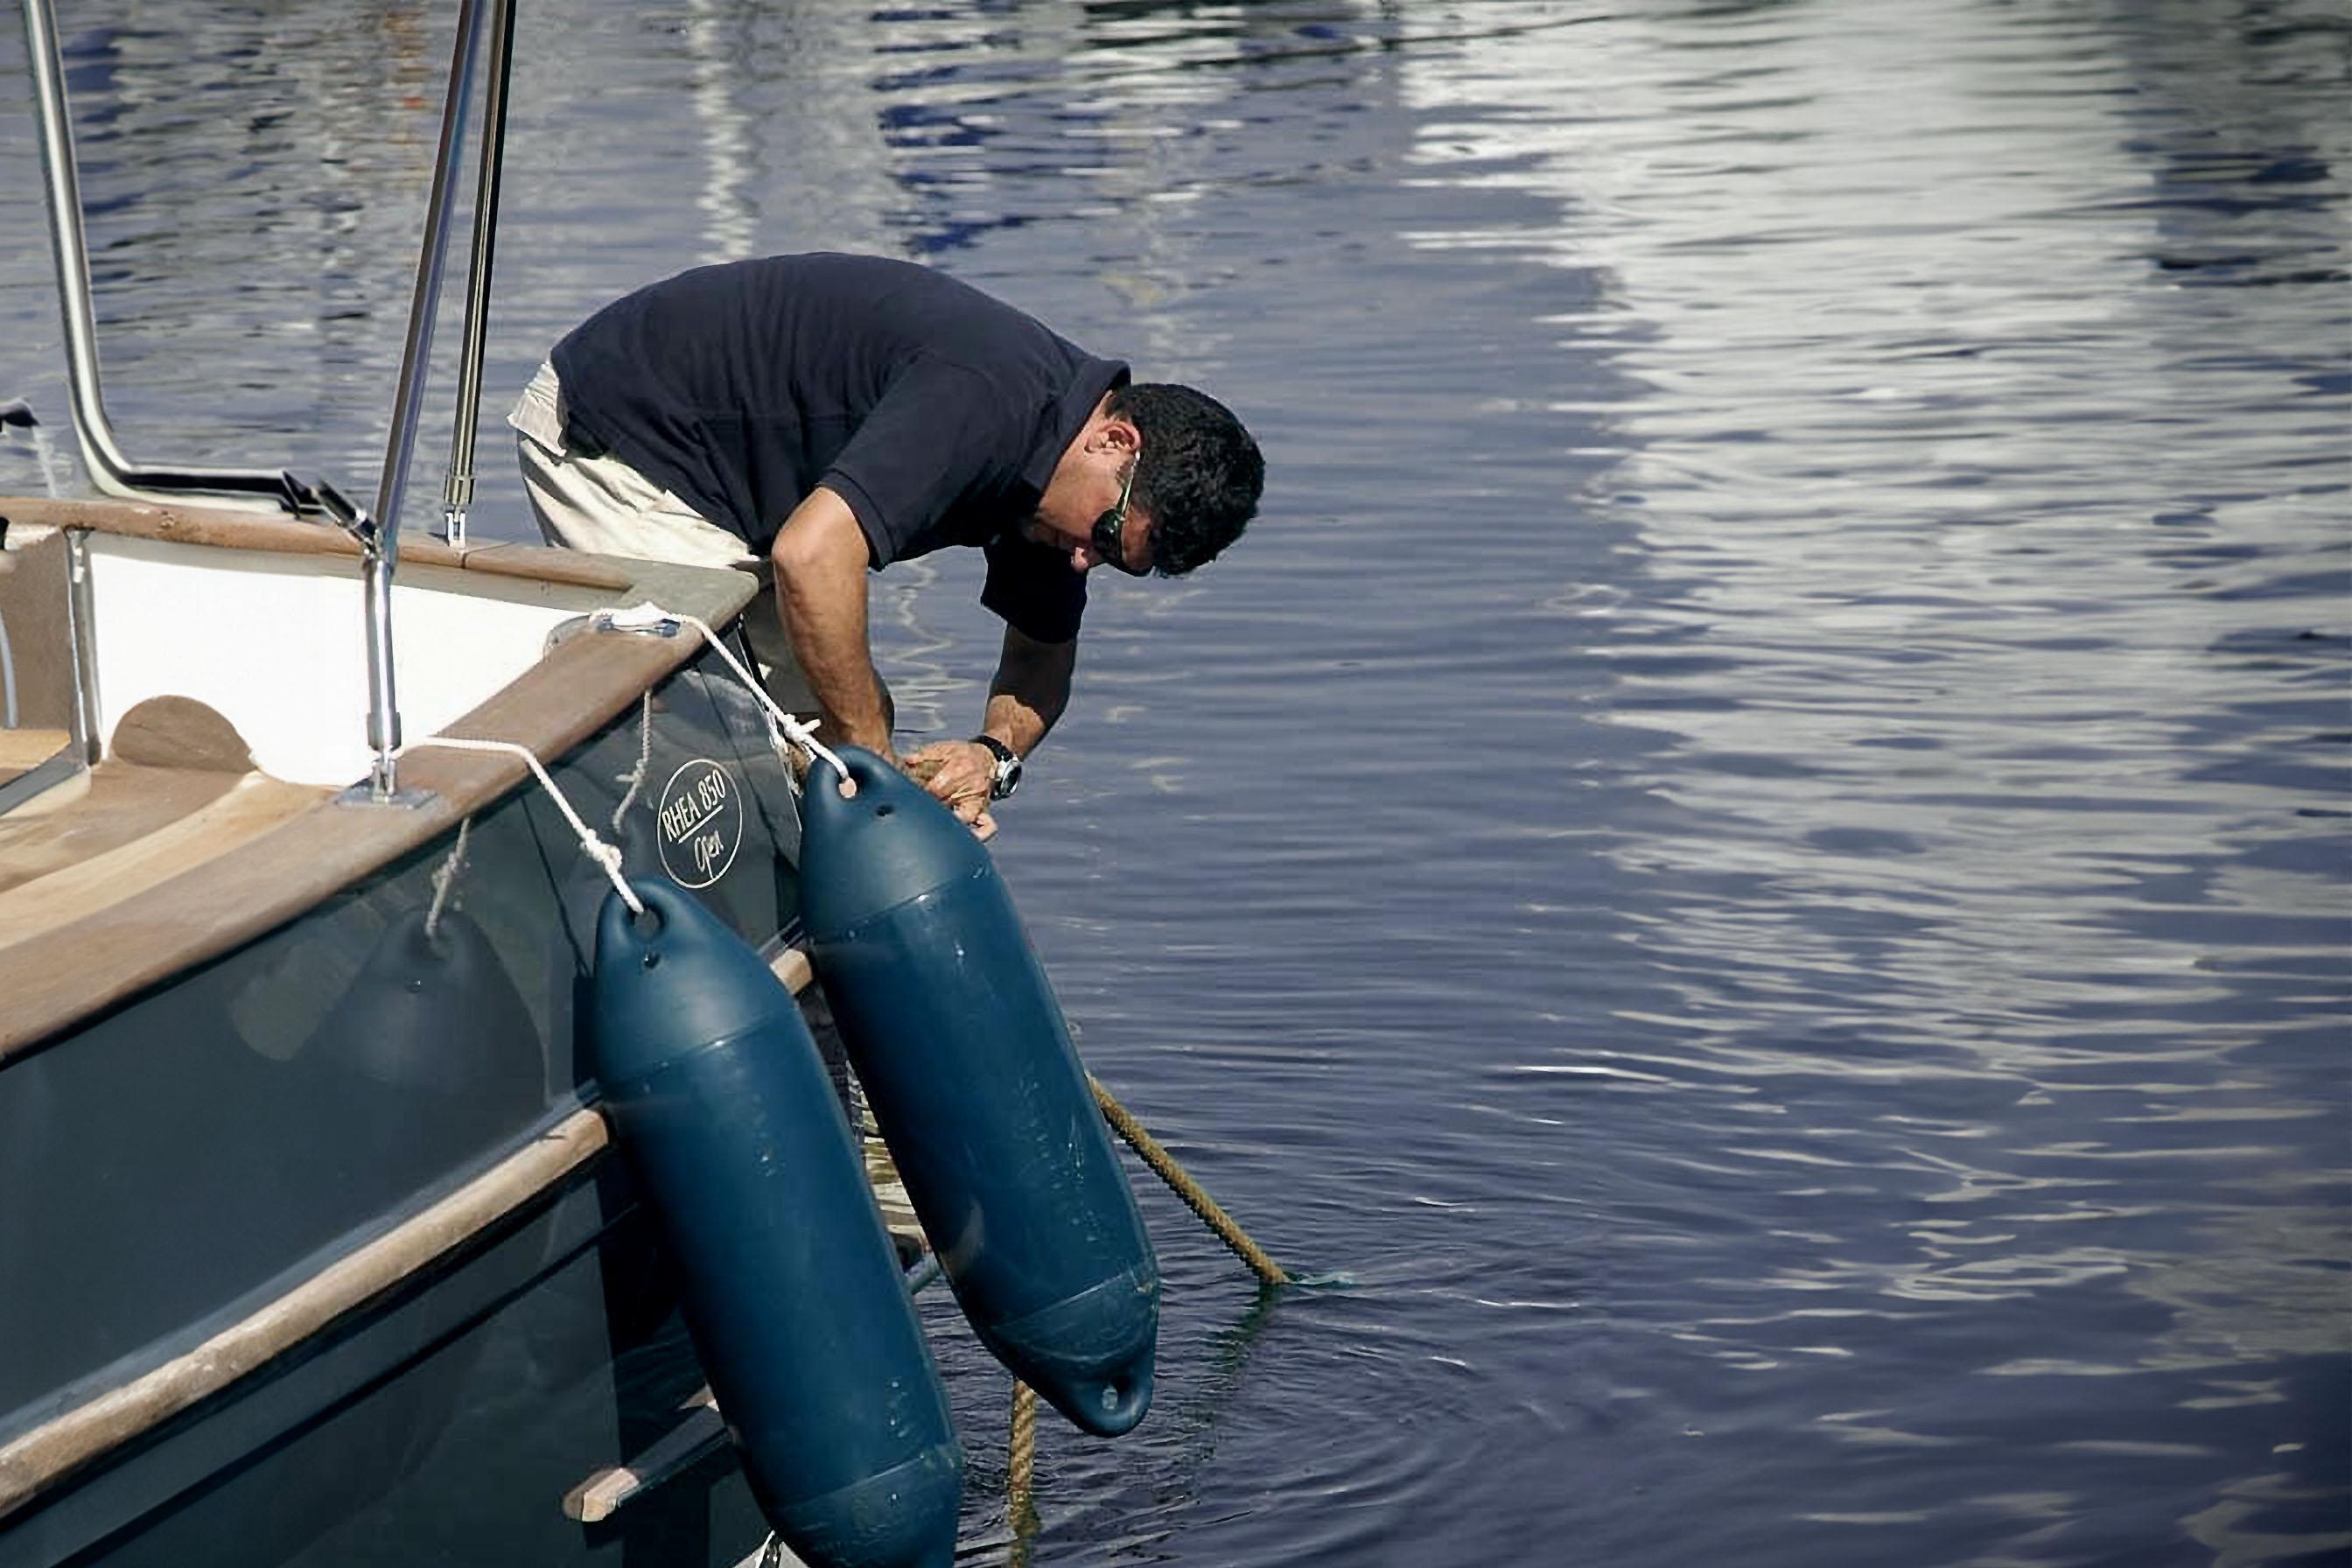 A man working a boat